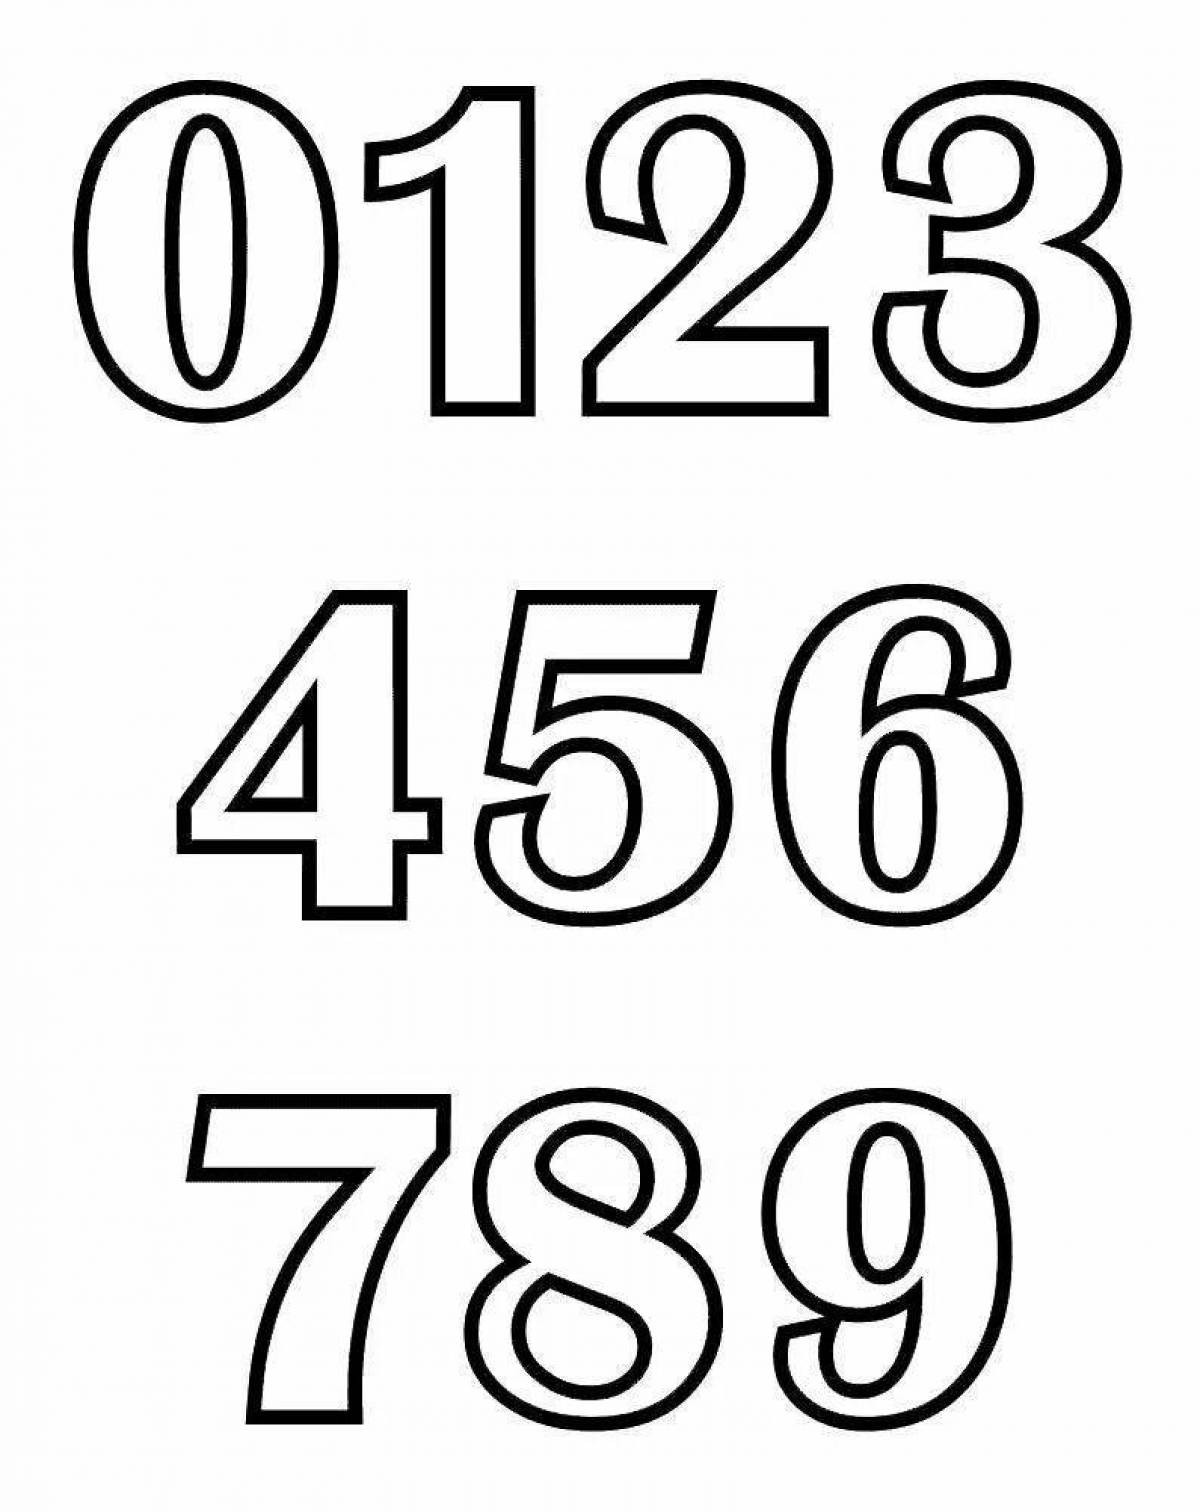 Excellent coloring beautiful numbers